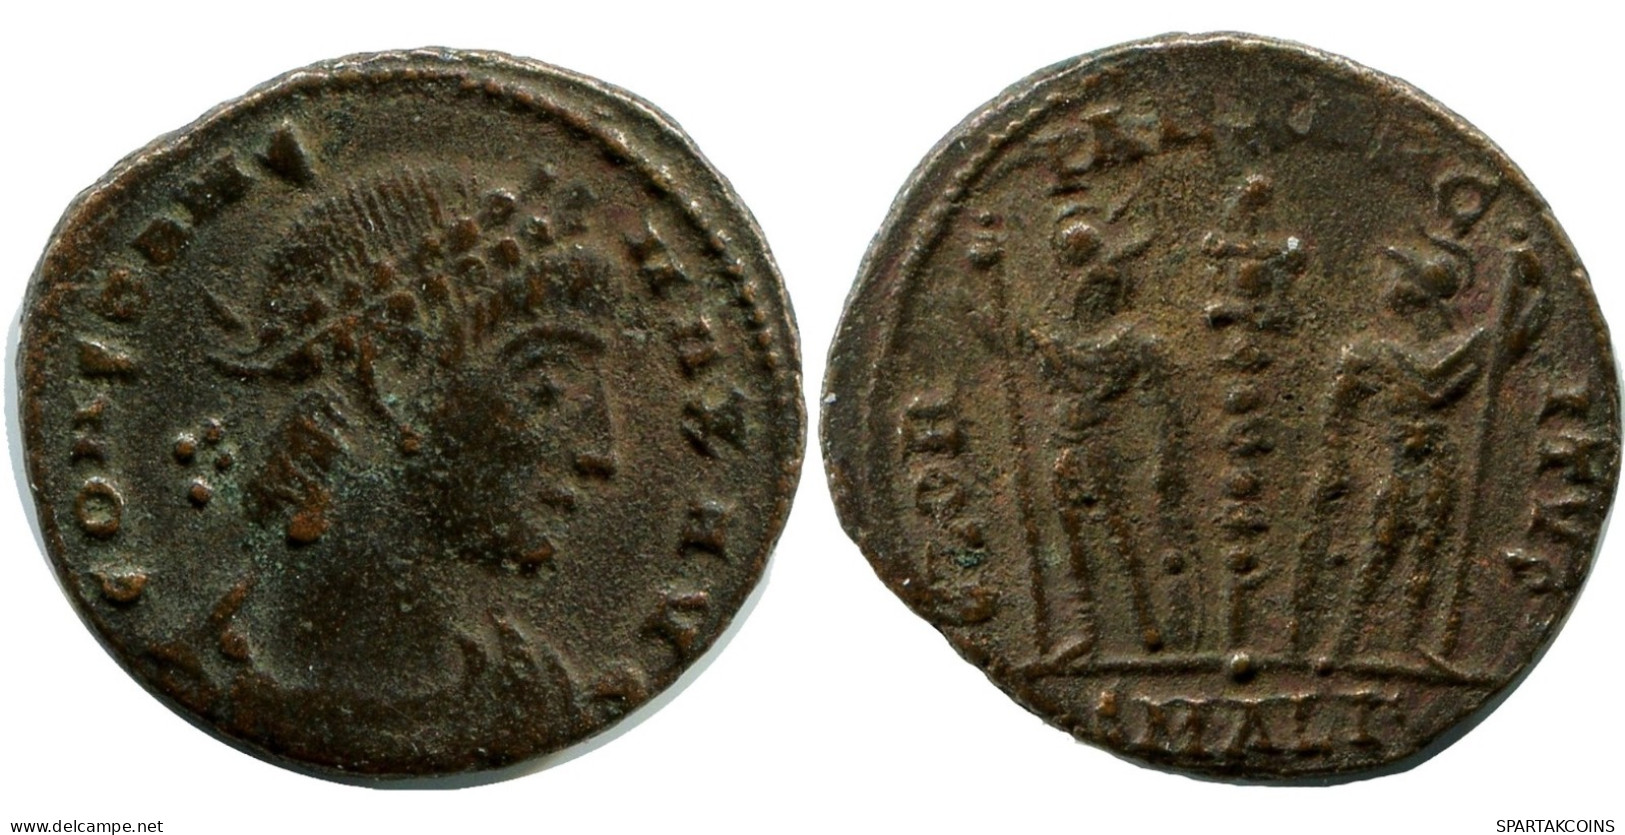 CONSTANS MINTED IN ALEKSANDRIA FROM THE ROYAL ONTARIO MUSEUM #ANC11430.14.D.A - L'Empire Chrétien (307 à 363)